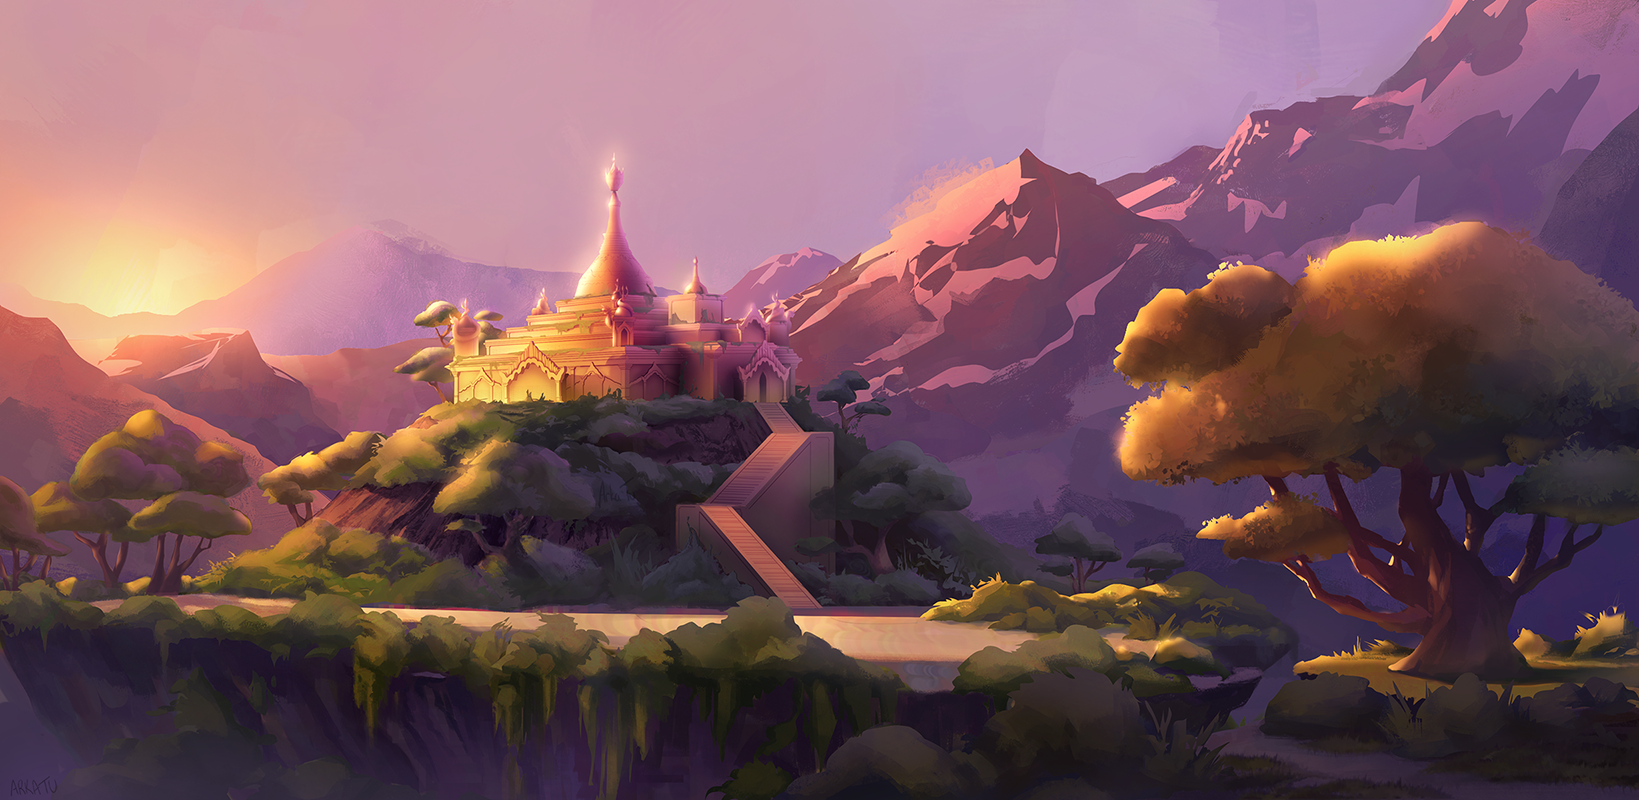 Environmental painting of Buddhist pagoda at sunset, trees and mountains surrounding the pagoda